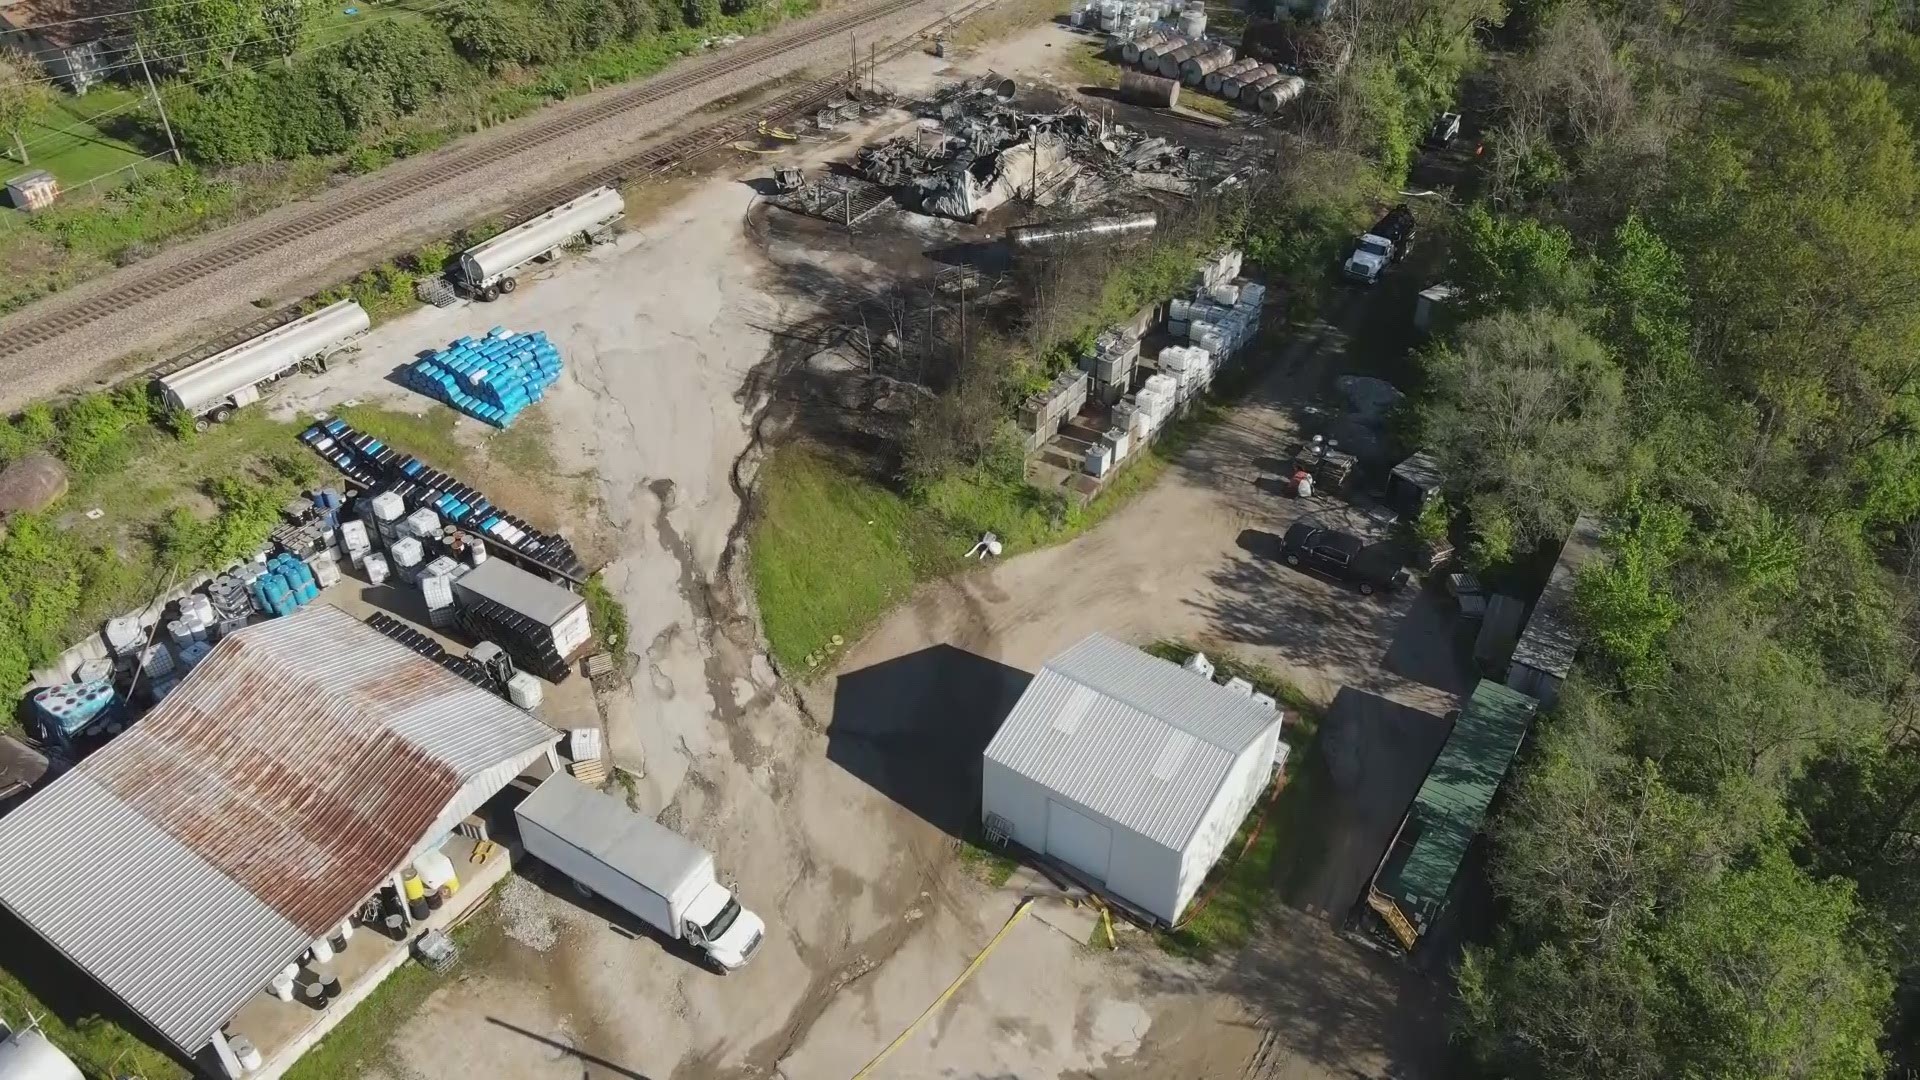 Video from the 5 On Your Side drone shows charred buildings, ash and debris after an explosion. A chemical plant in Affton exploded into flames Thursday.